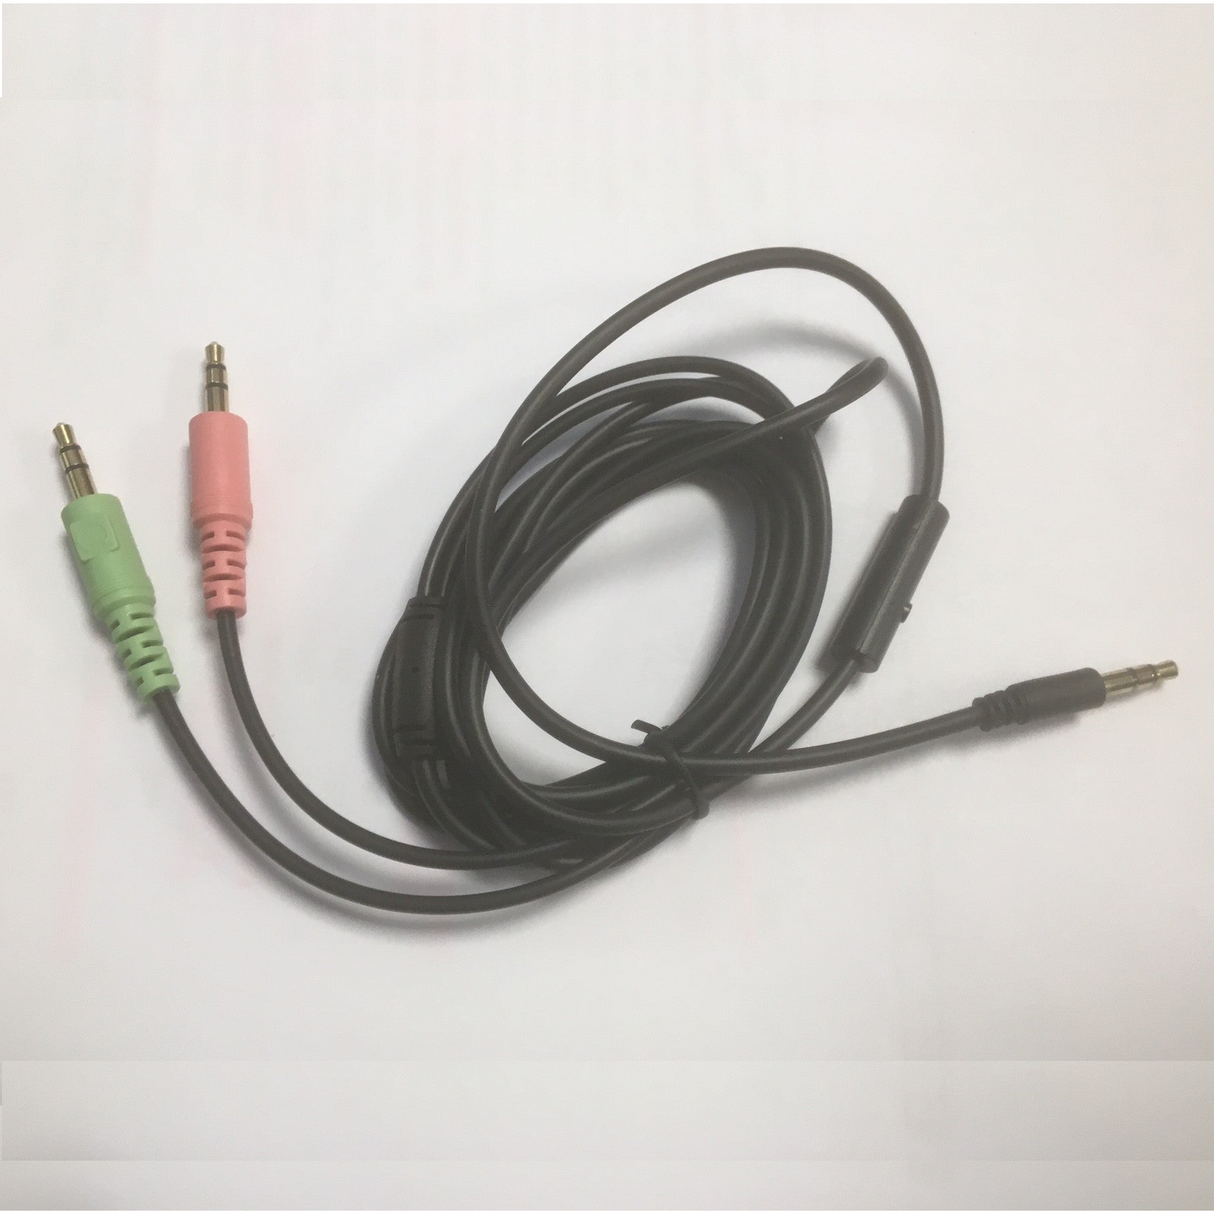 4-Pole to 2 x 3.5mm male audio cable with in-line microphone